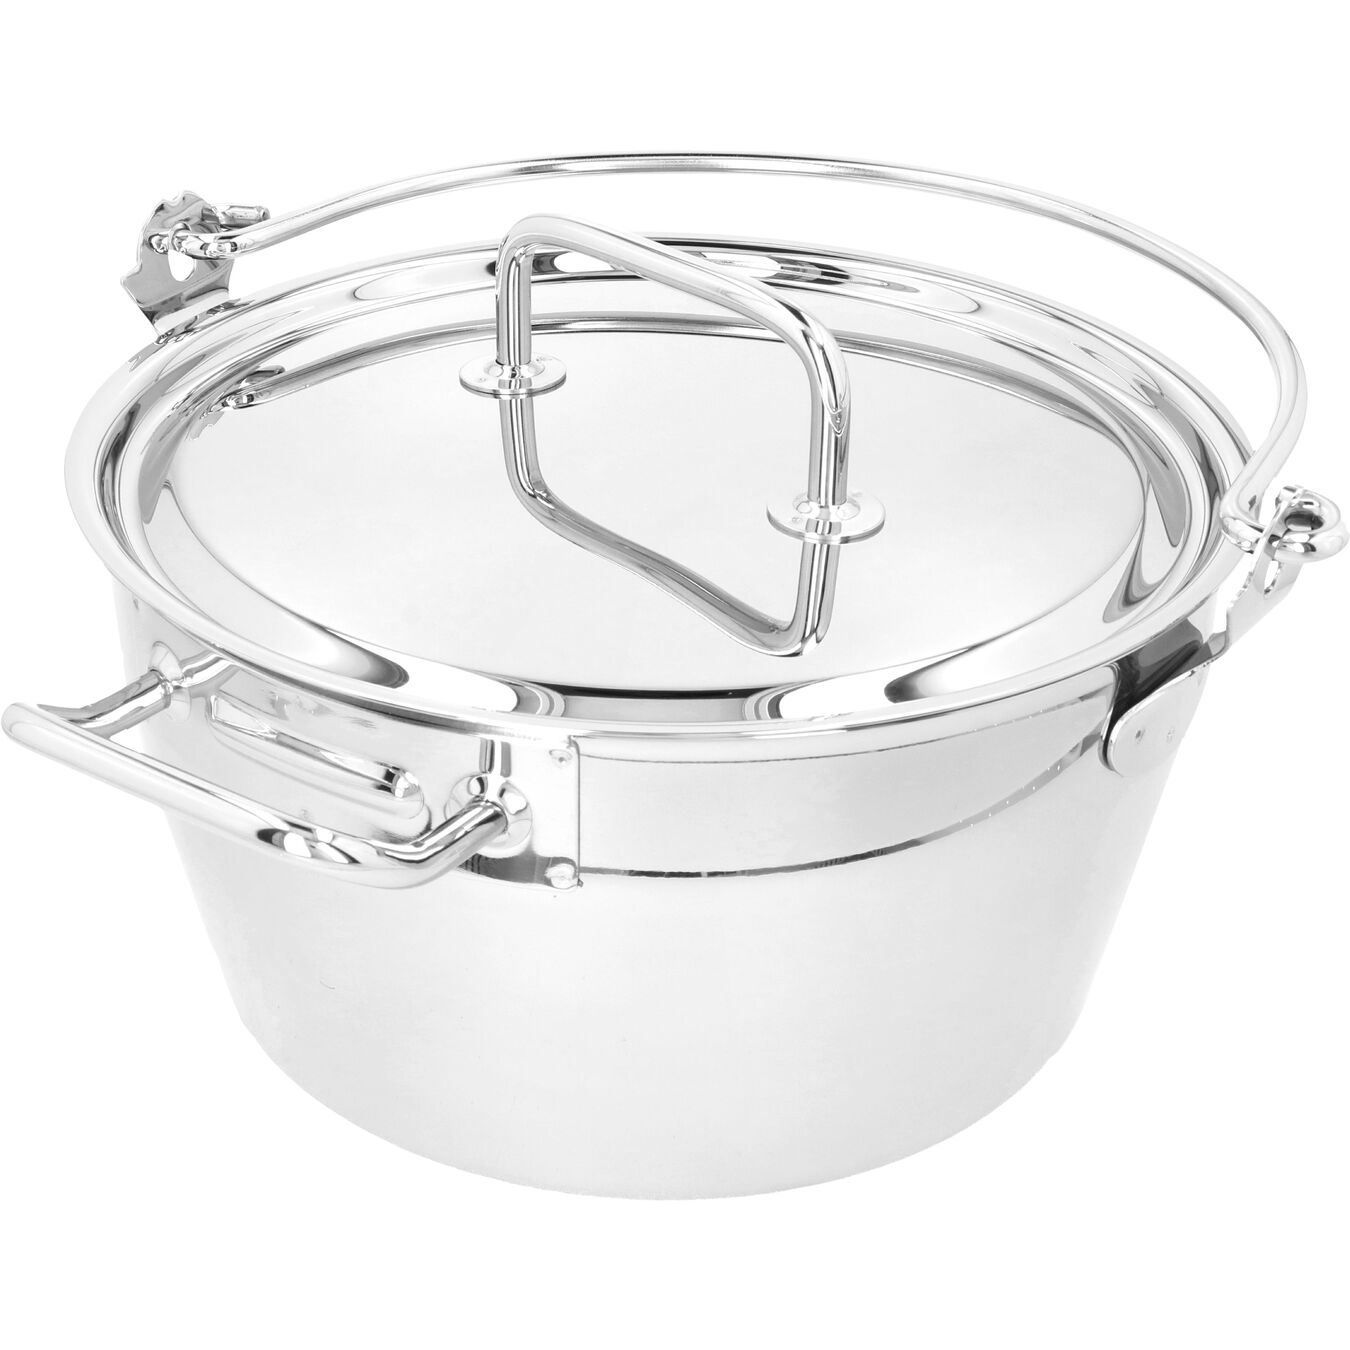 10.6 qt, 18/10 Stainless Steel, Maslin Pan,,large 5